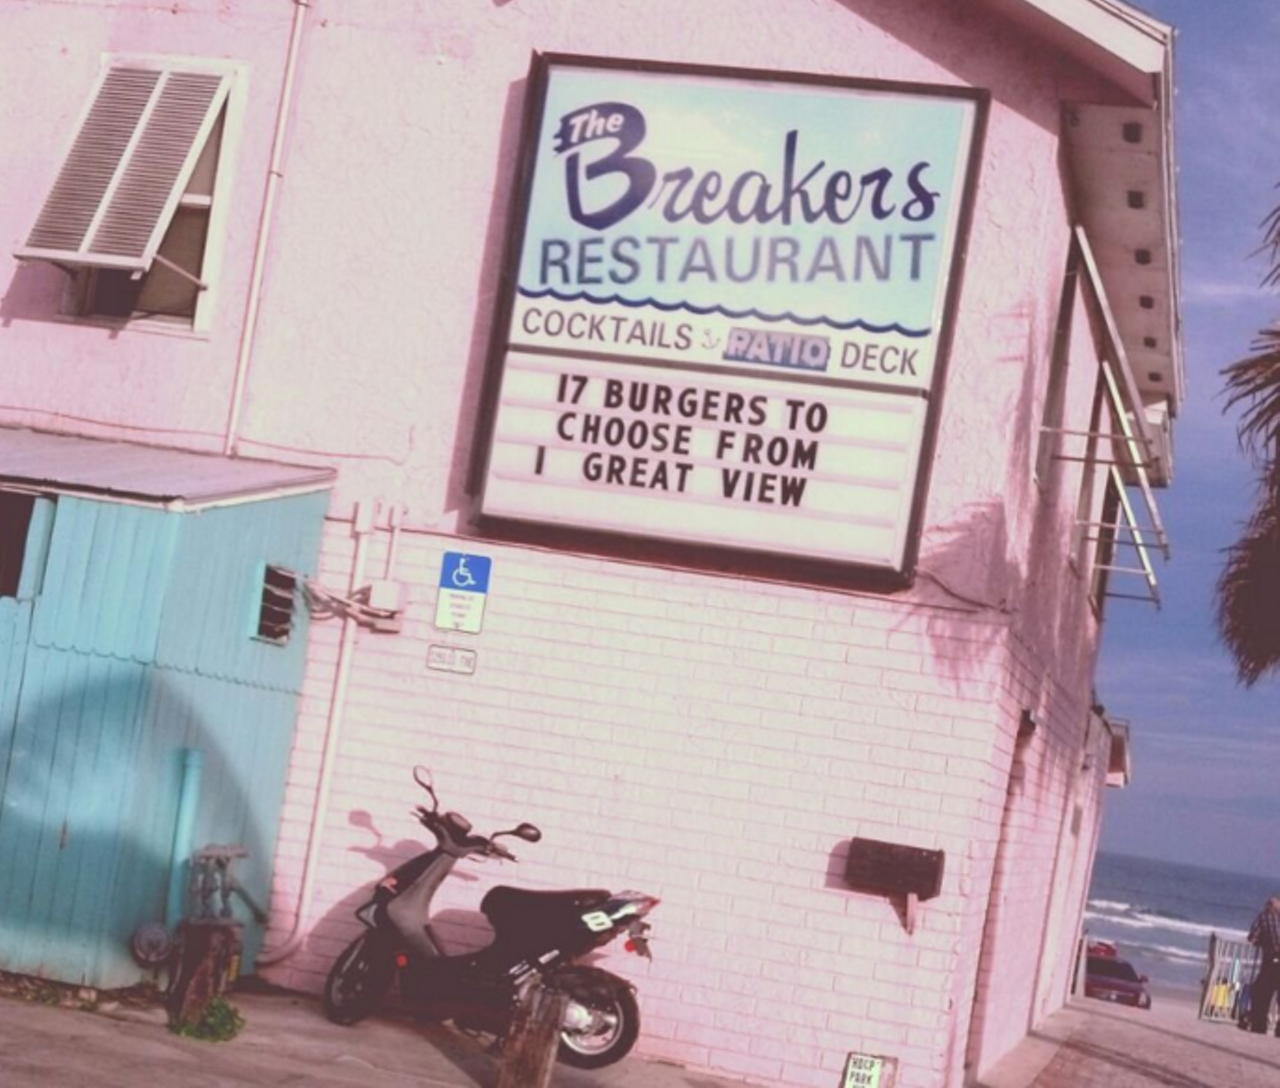 The Breakers Restaurant
Distance from Orlando:  1 hour 
If you can get a seat here, Breakers is one of the best spots in New Smyrna to grab a drink or some grub. Try one of their many burgers or their shrimp skewers.  
518 Flagler Ave, New Smyrna Beach
Photo via Tanya K./Yelp